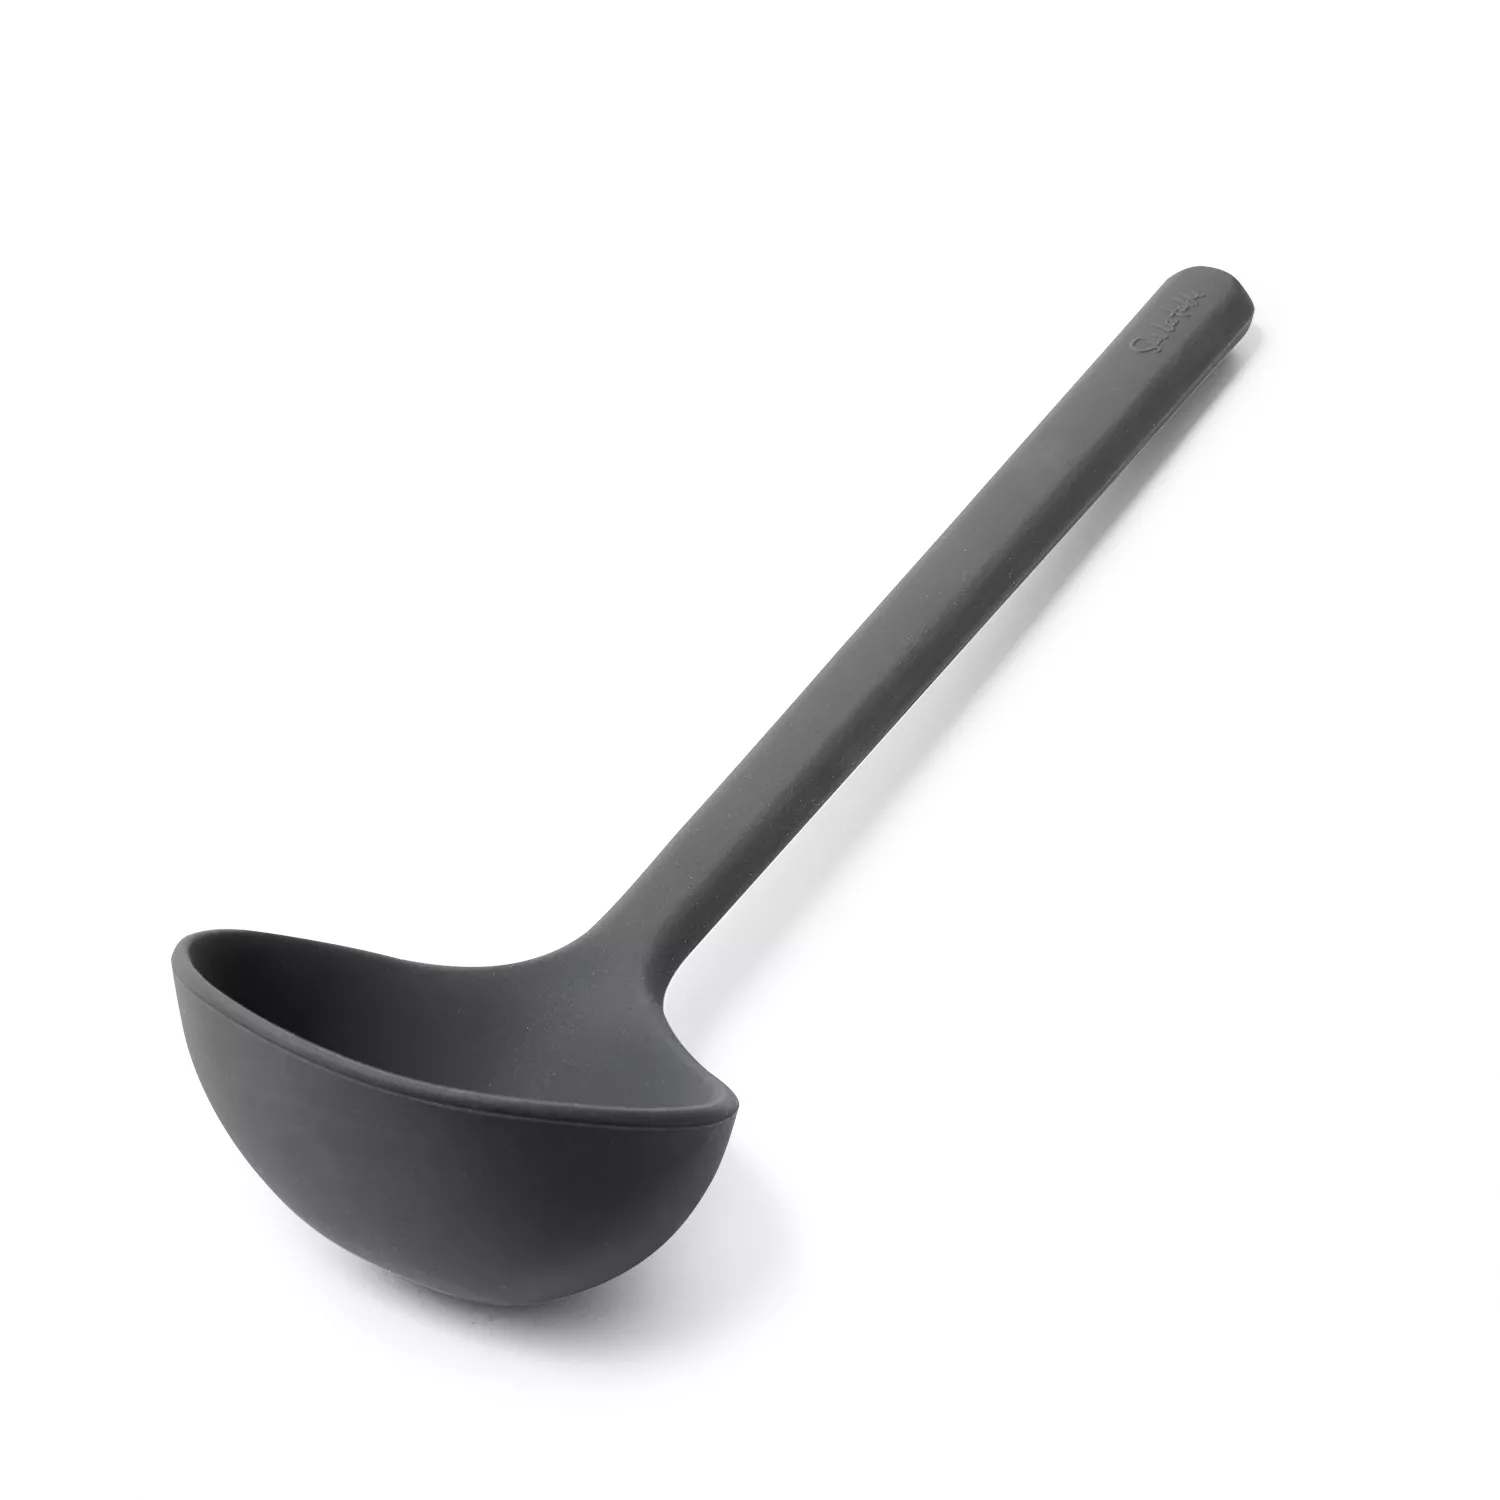  Tovolo Mixing Spoon With Stainless Steel Handle  Scratch-Resistant & Heat-Resistant Stirring, Kitchen Utensil Safe for  Nonstick Cookware & Cast Iron Skillets, Oyster Gray: Home & Kitchen